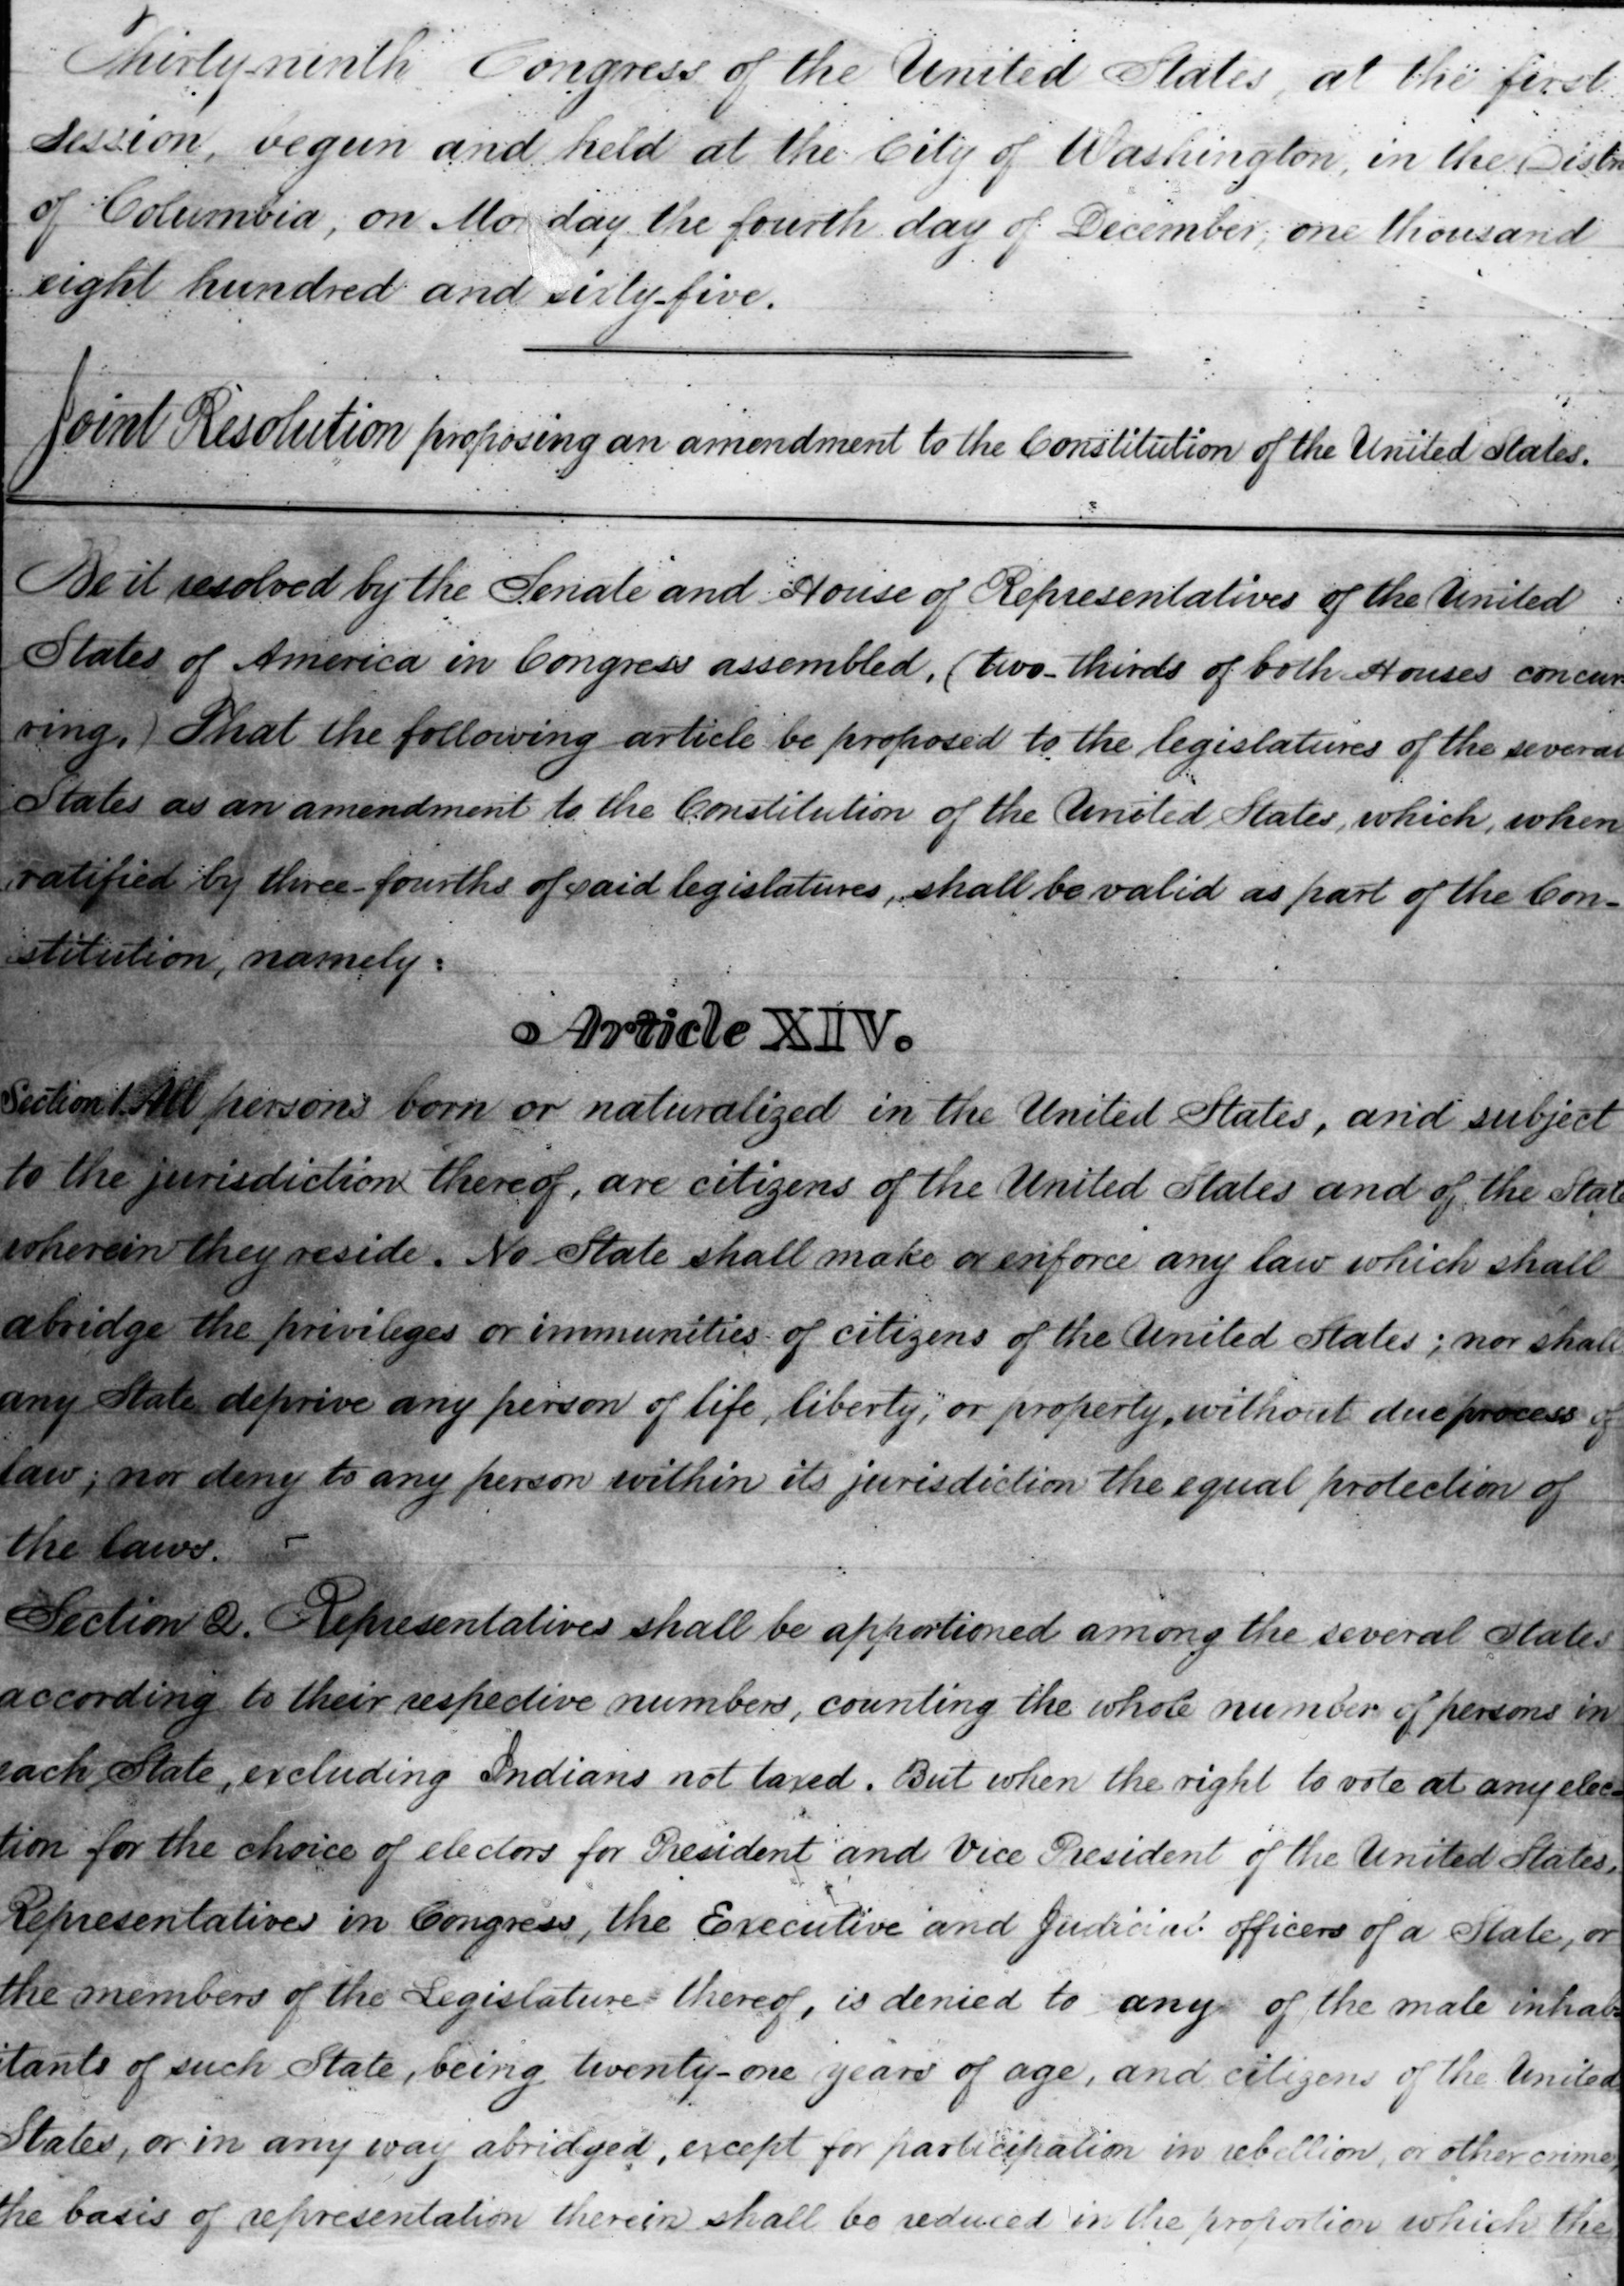 Draft of the 14th Amendment to the United States Constitution, outlining the rights and privileges of American citizenship, ratified in 1868. (Hulton Archive/Getty Images)